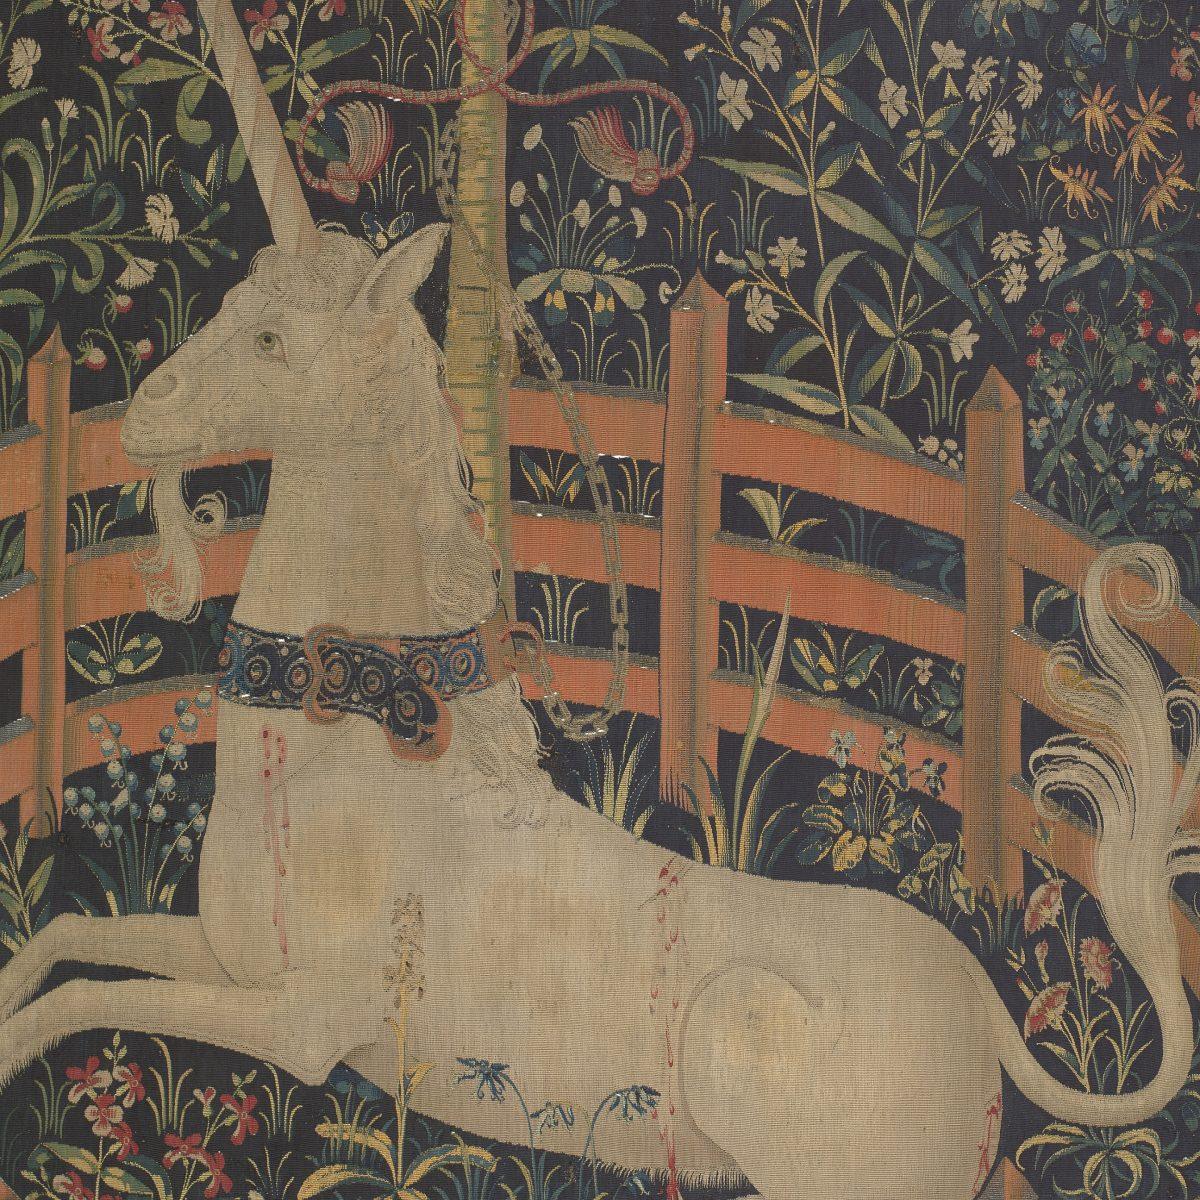 A detail from “The Unicorn in Captivity,” 1495–1505, South Netherlandish. Wool warp with wool, silk, silver, and gilt wefts; 144 7/8 inches by 99 inches. Gift of John D. Rockefeller Jr., 1937, The Met Cloisters. (The Metropolitan Museum of Art )